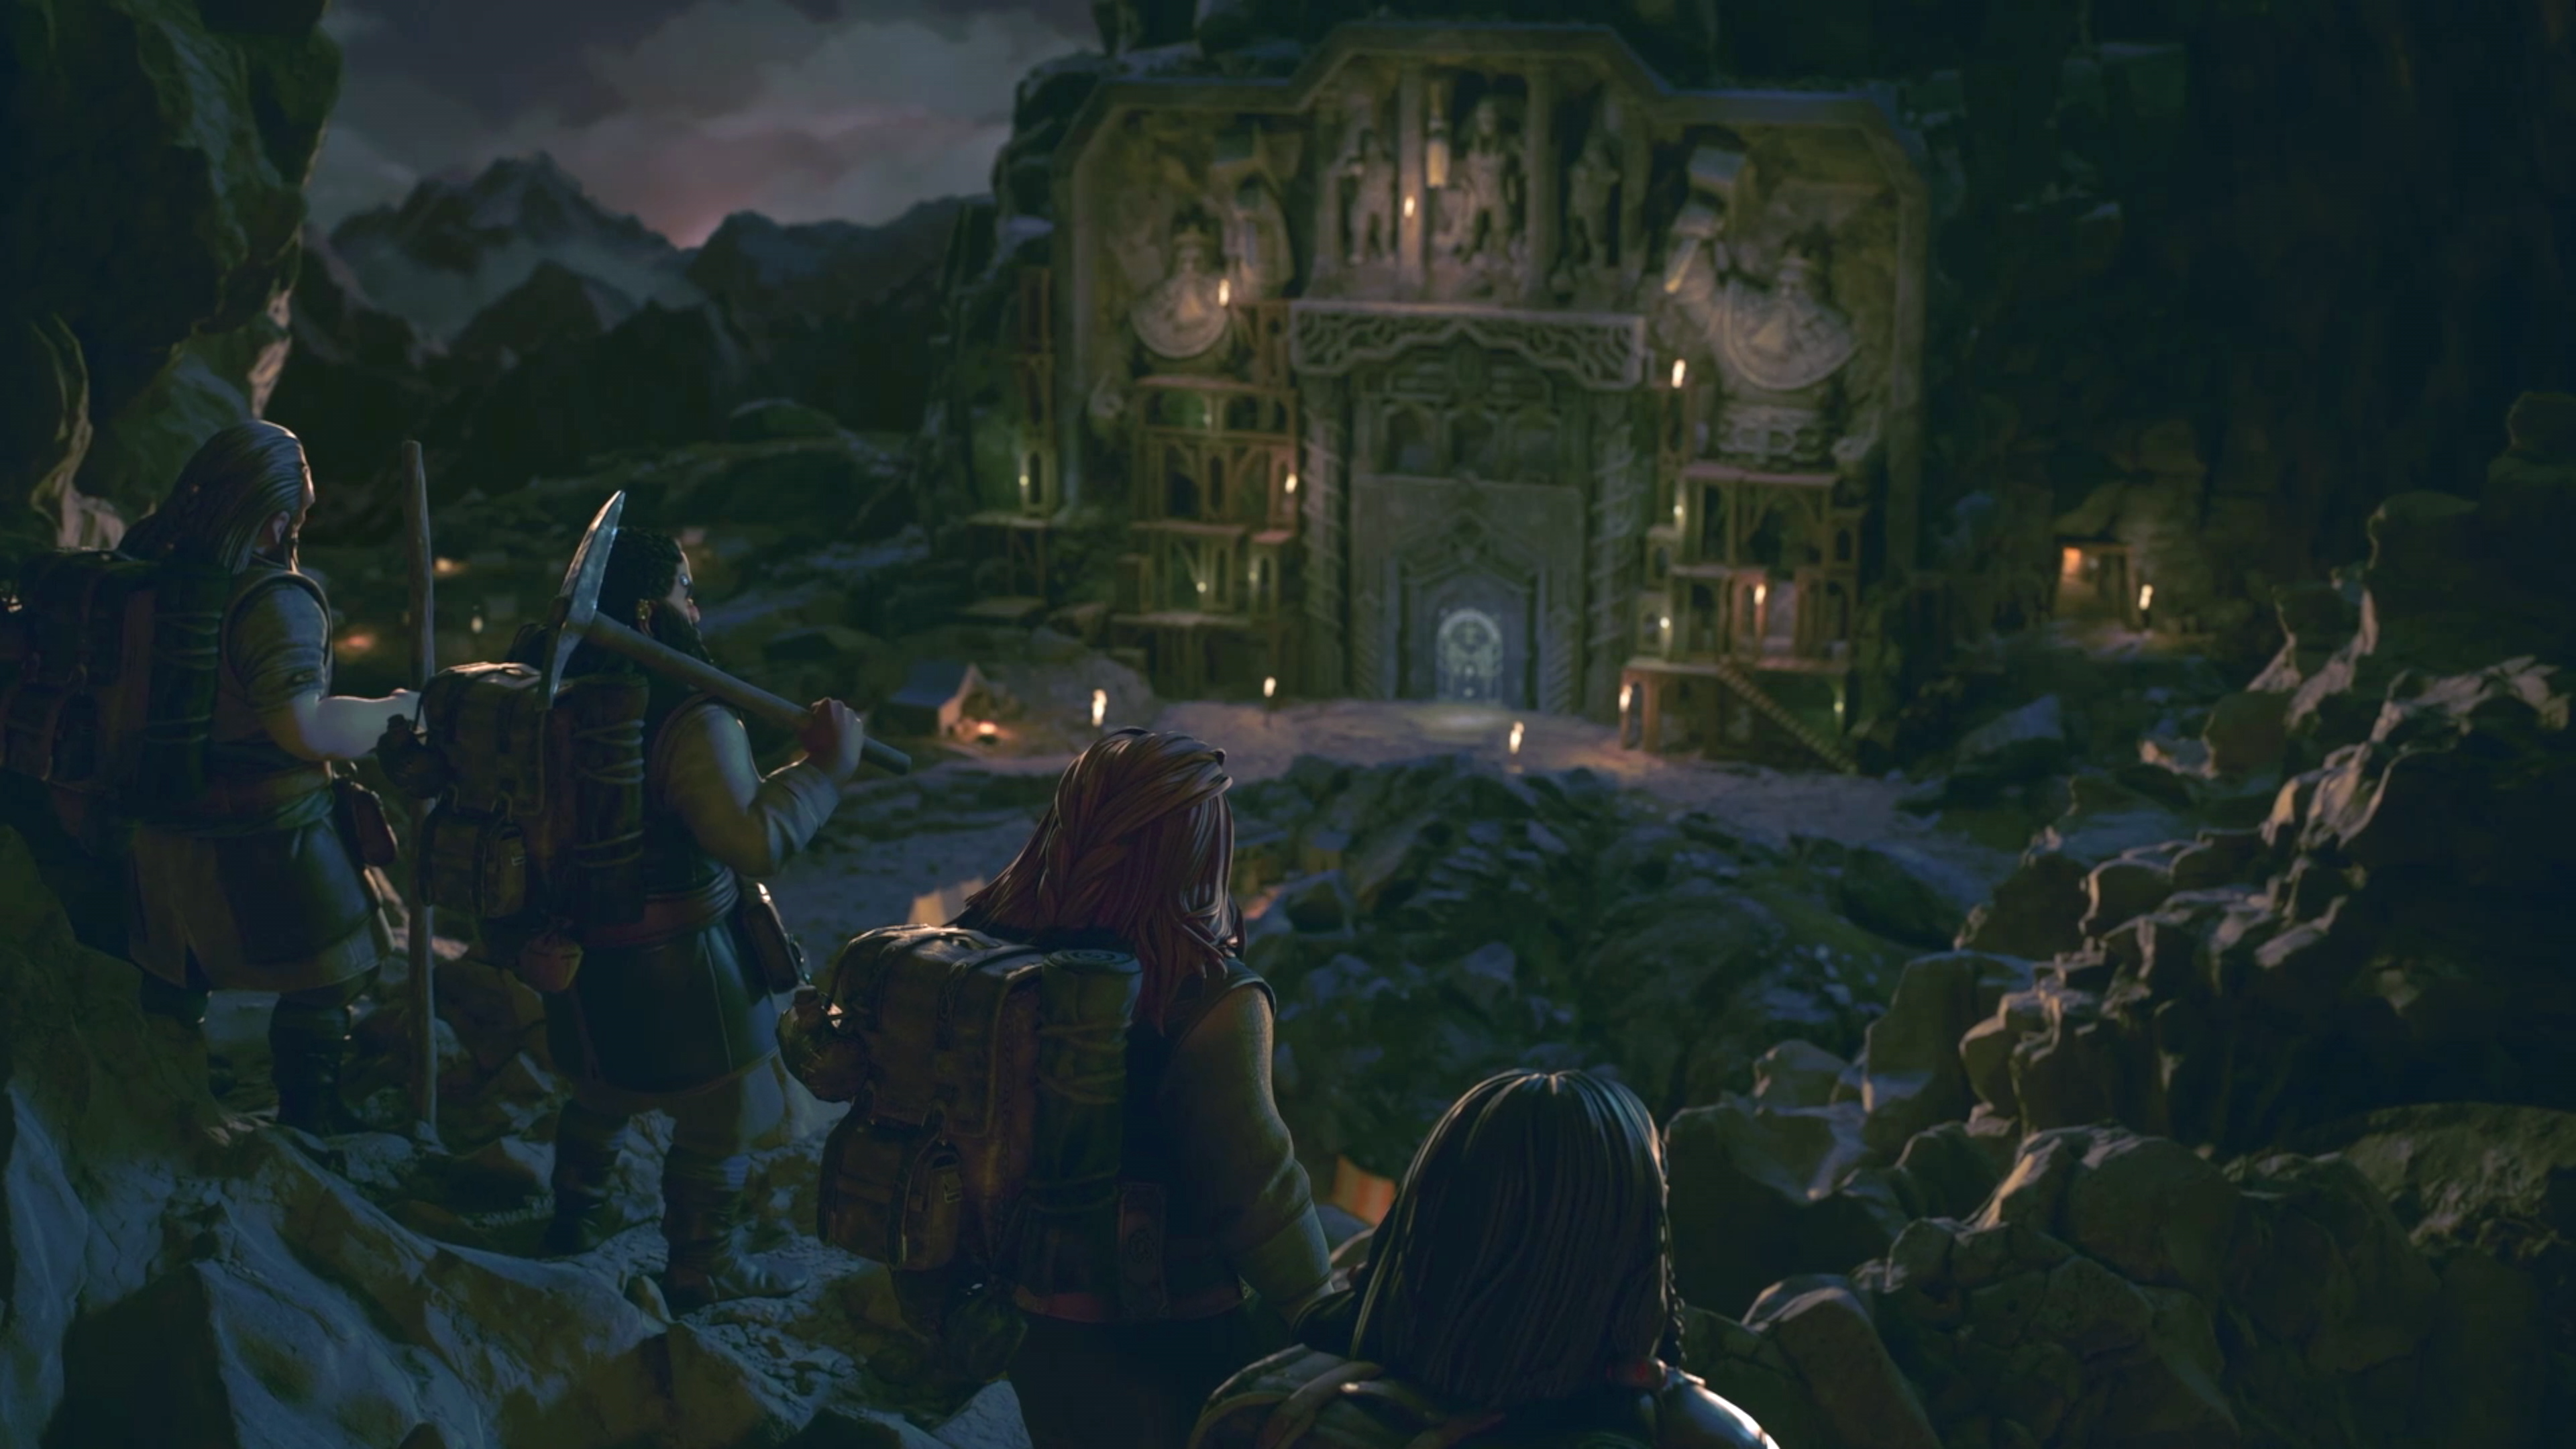 Lord of the Rings: Return to Moria launches for PC